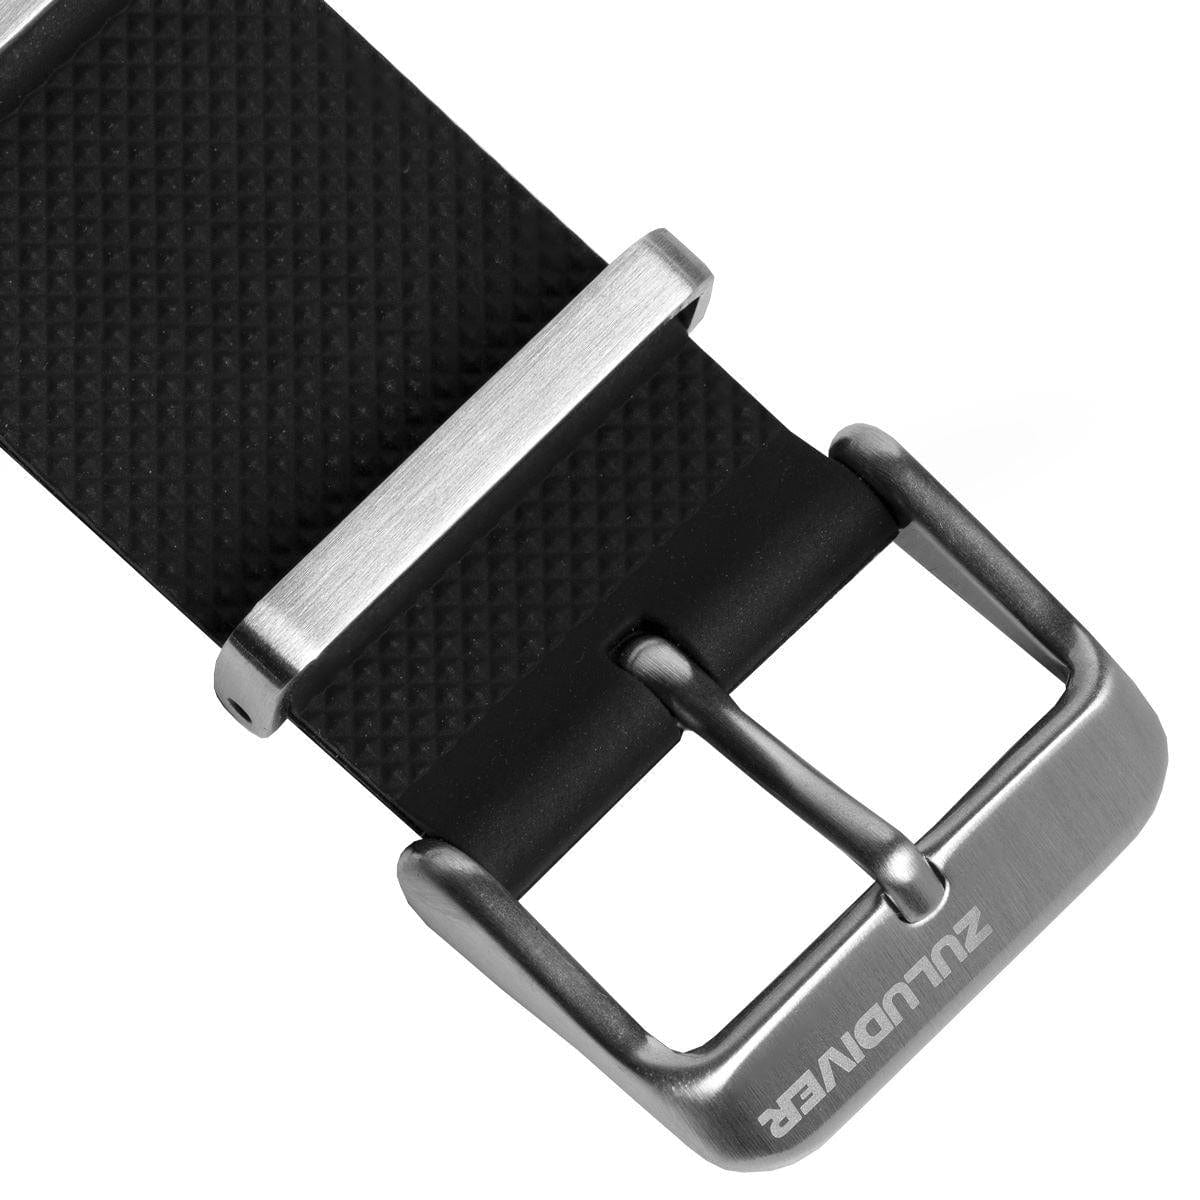 ZULUDIVER Seaton FKM Rubber Military Watch Strap - Black - Brushed Buckles